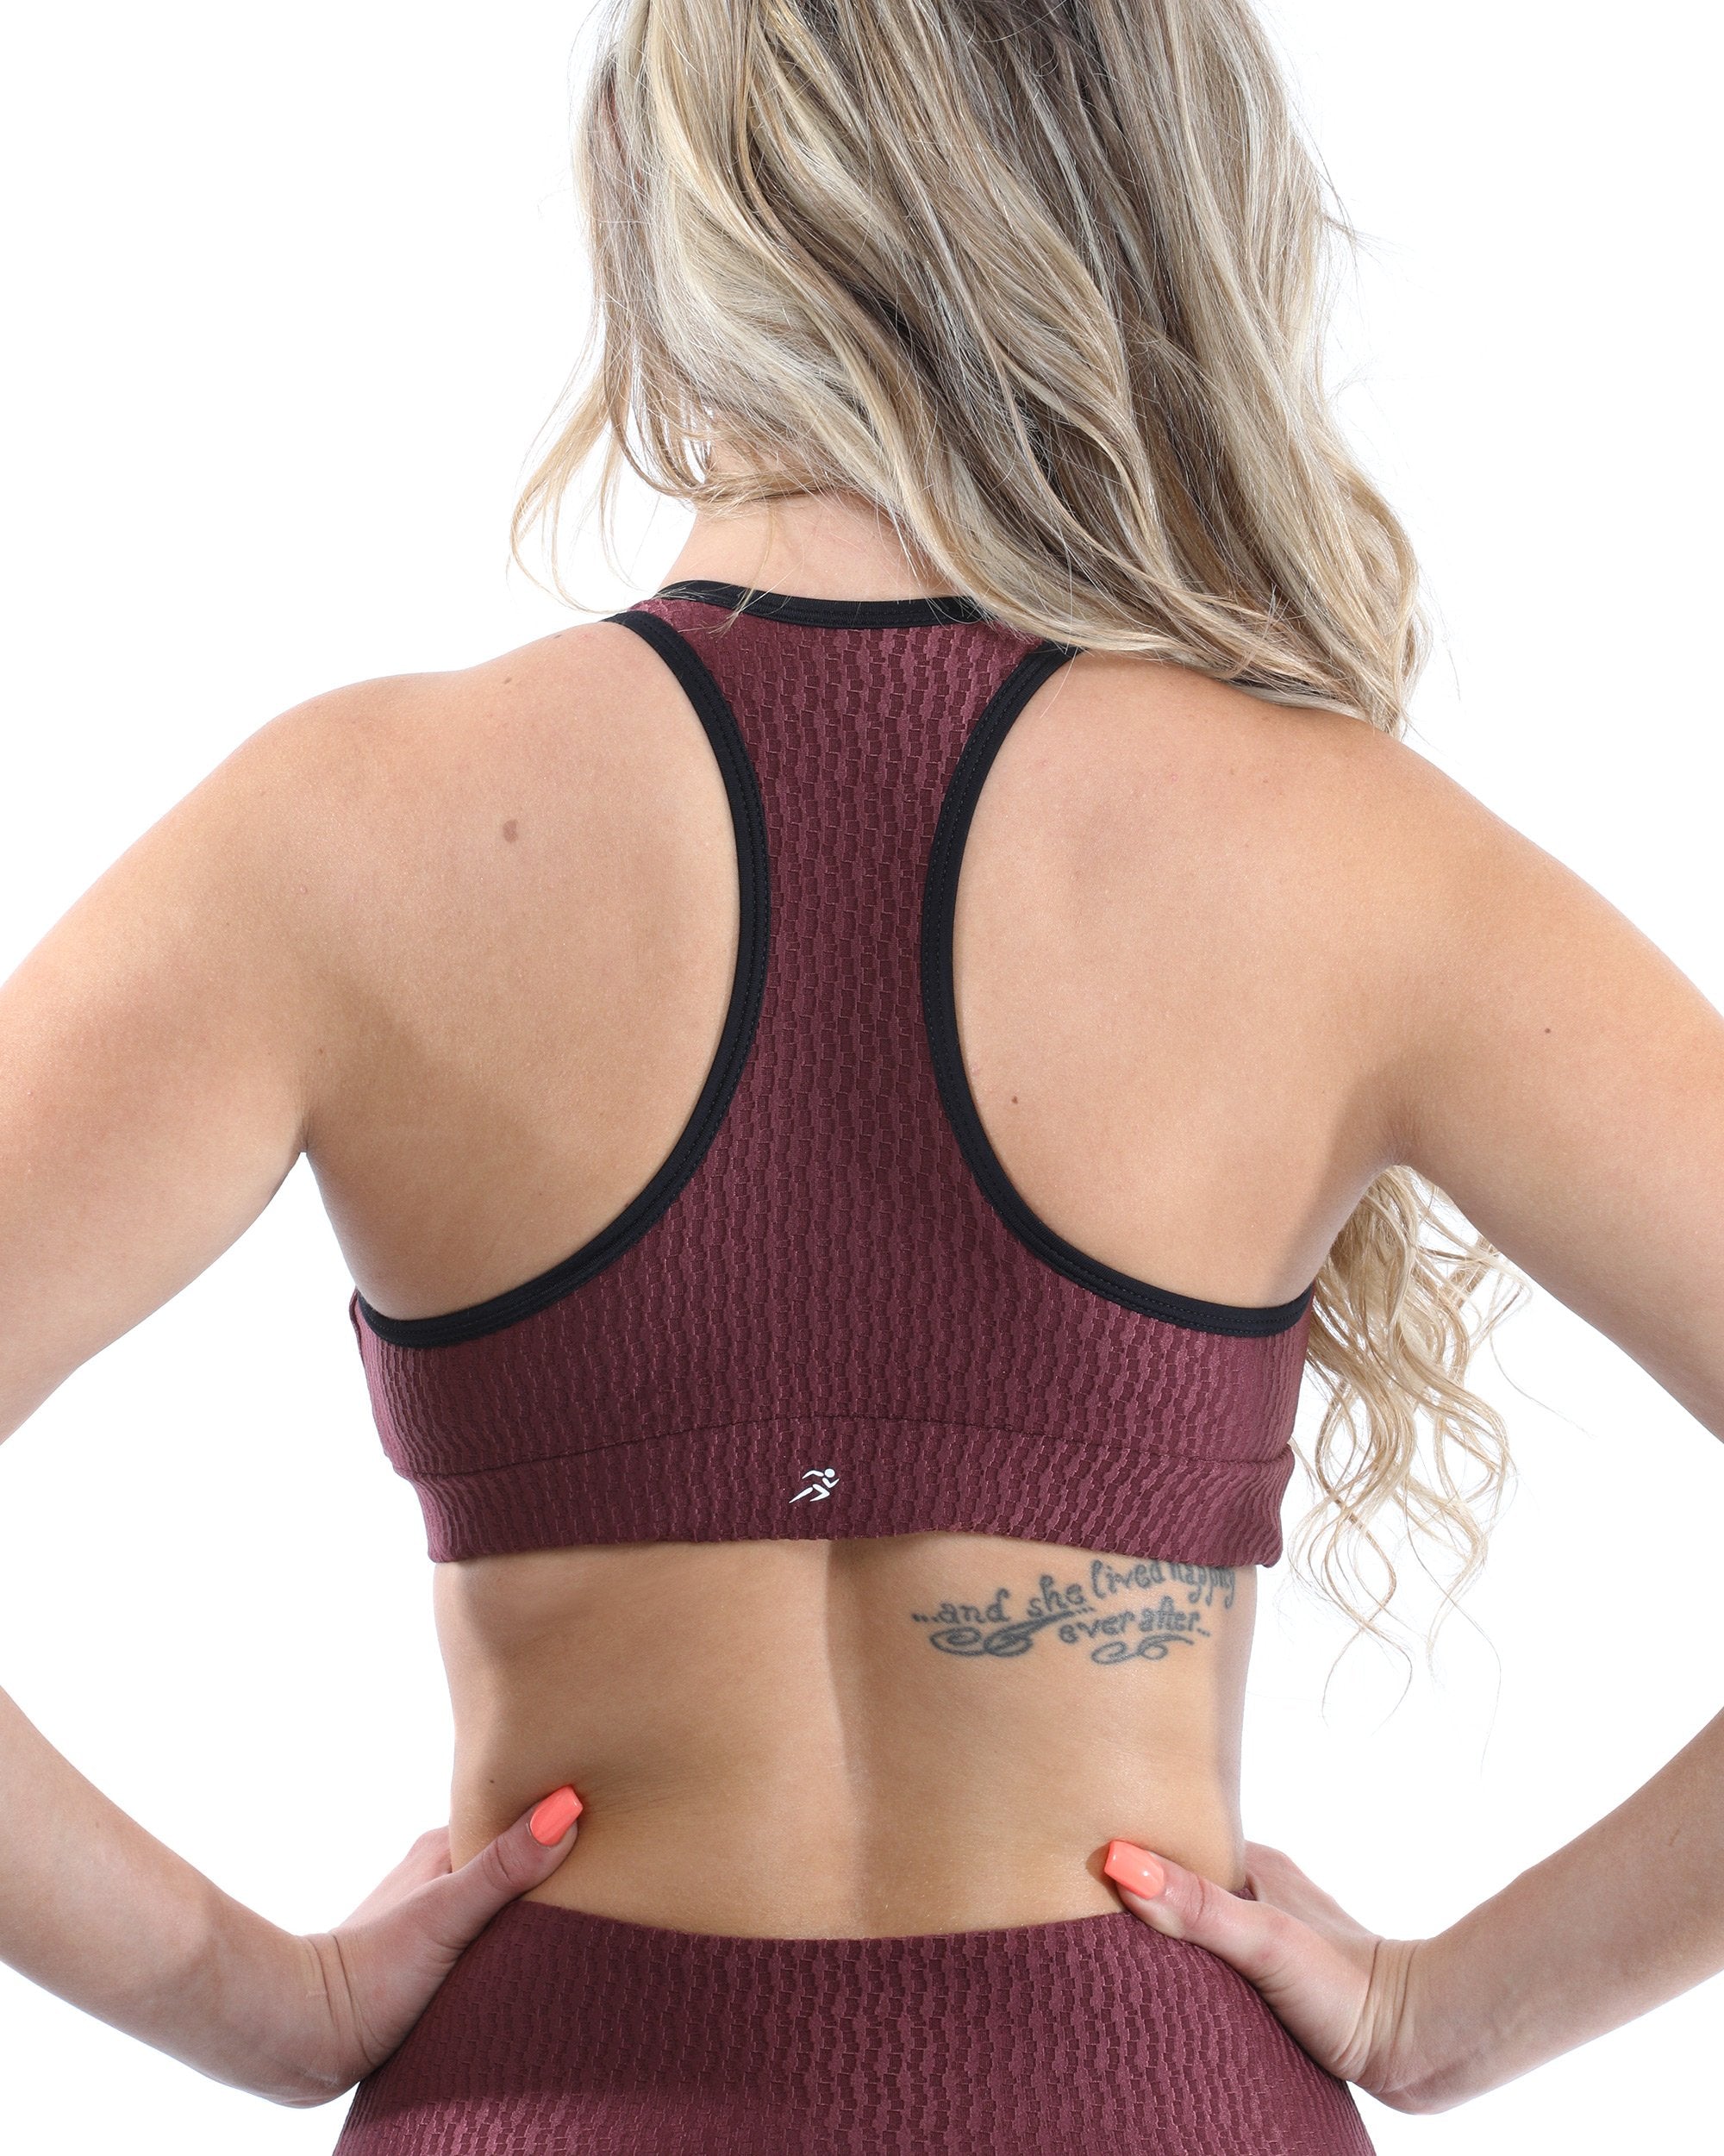 SALE! 50% OFF! Verona Activewear Set - Leggings & Sports Bra - Maroon [MADE IN ITALY] - Size Small